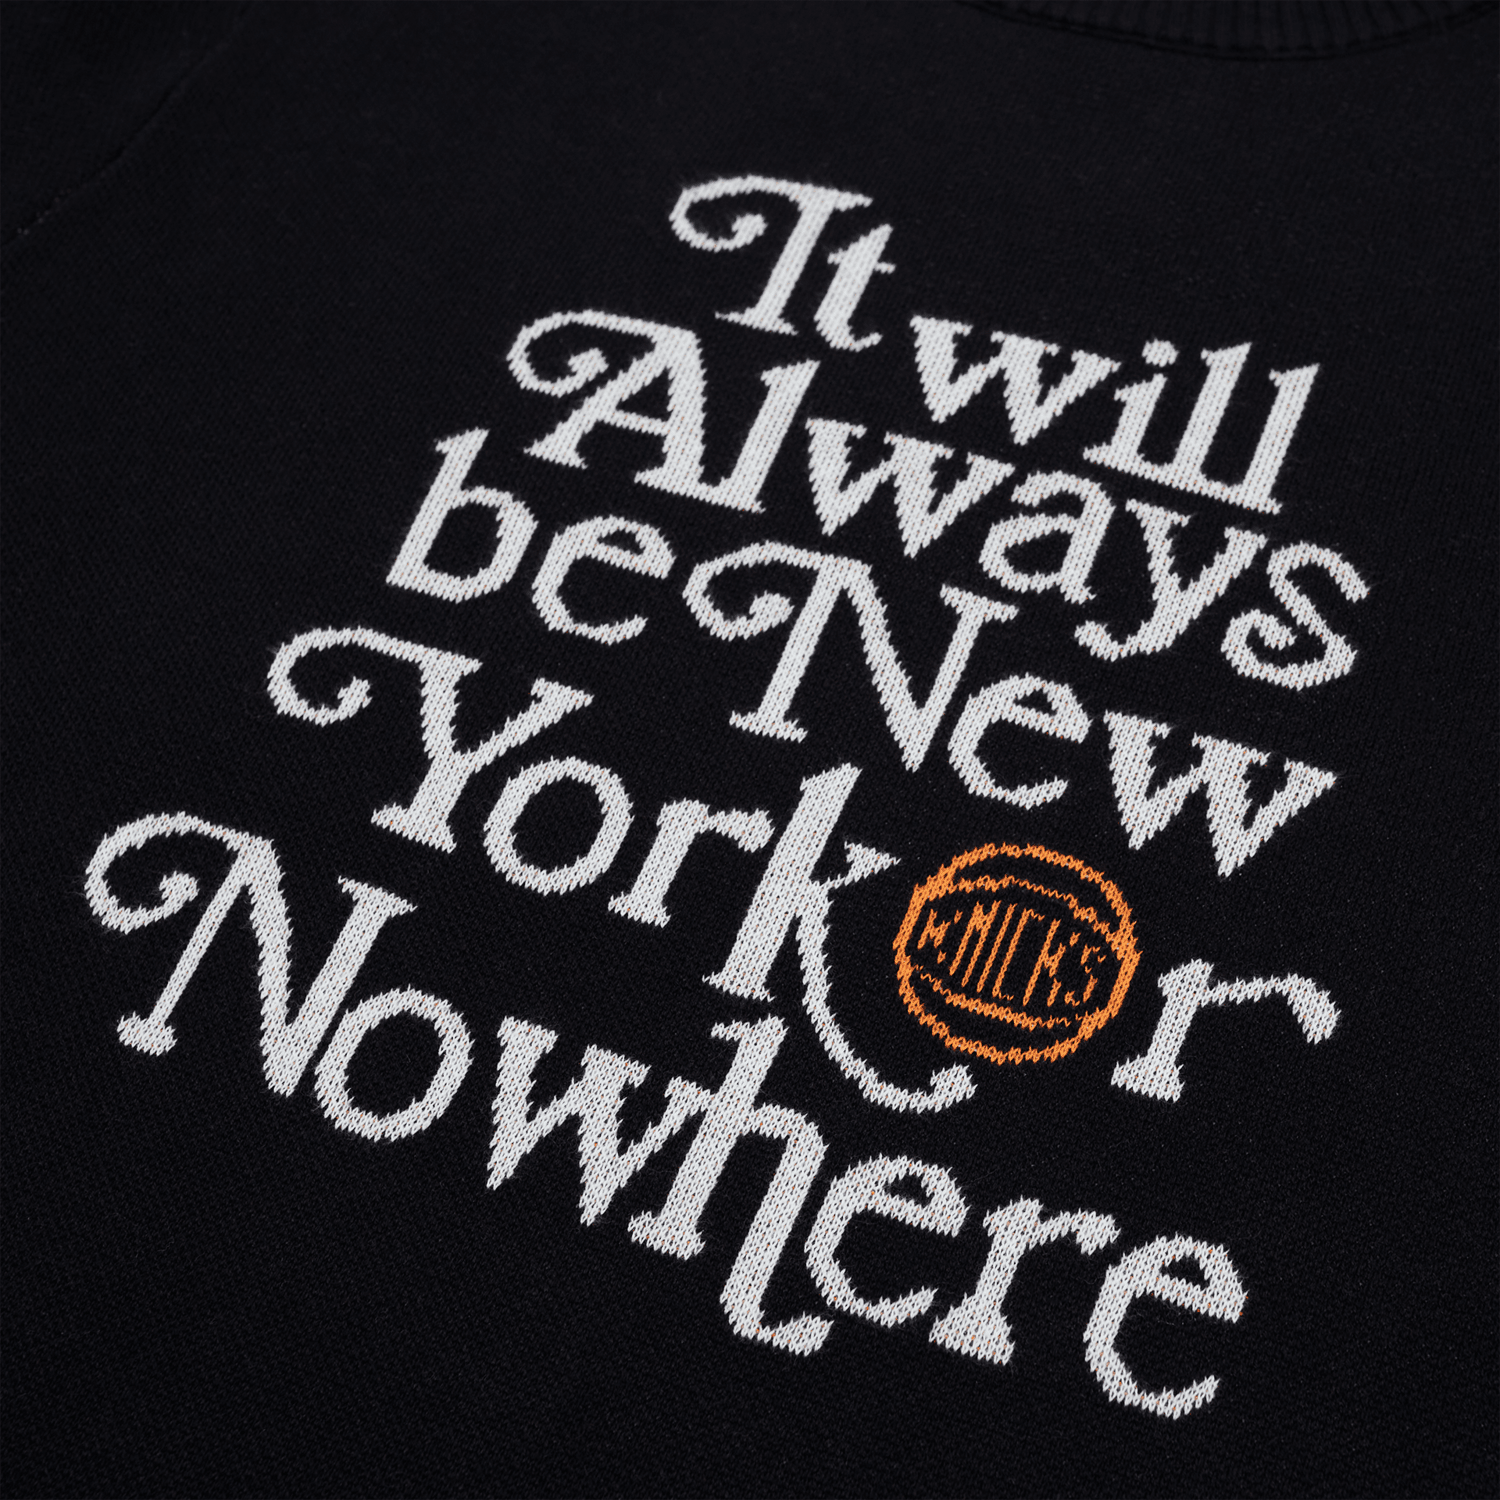 NYON x Knicks Always Knit Crew - Up Close Front View